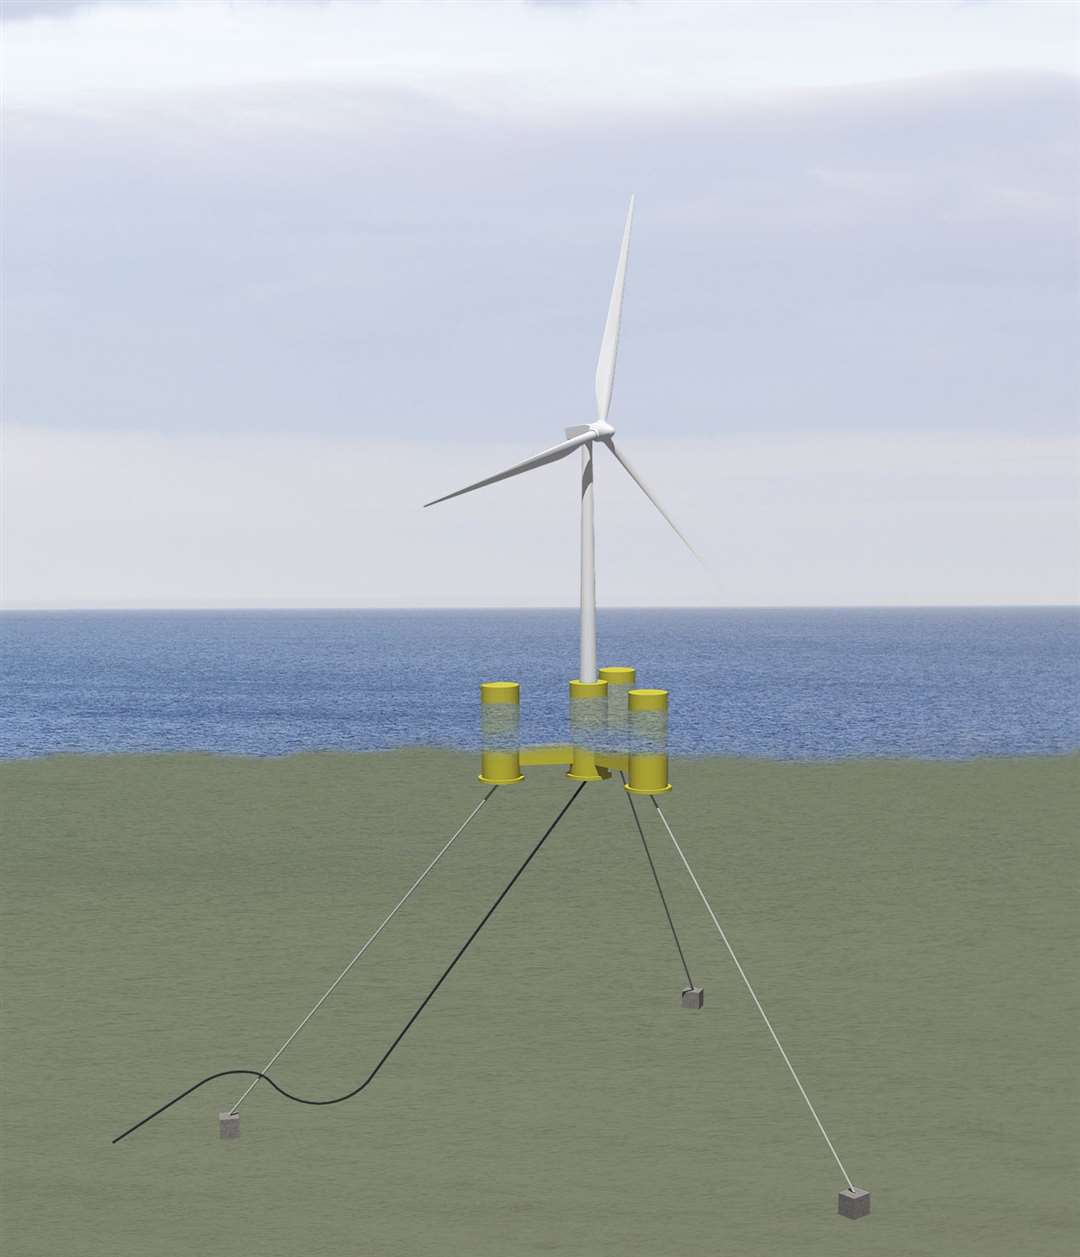 Illustration of a floating turbine and mooring system.